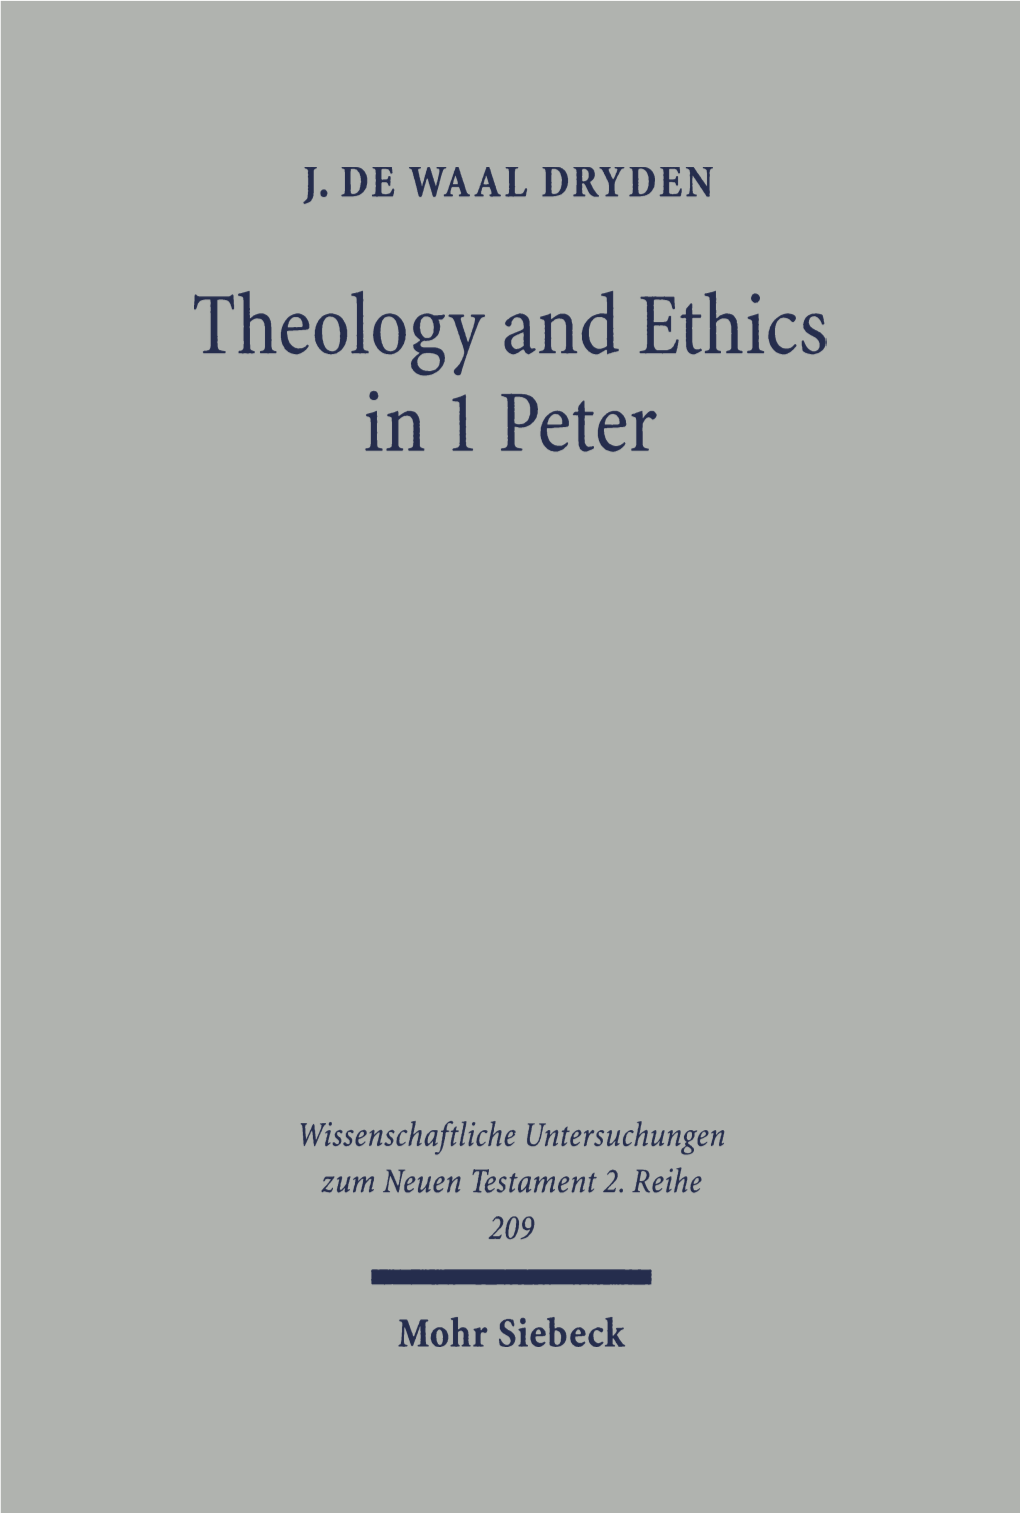 Theology and Ethics in 1 Peter. Paraenetic Strategies for Christian Character Formation